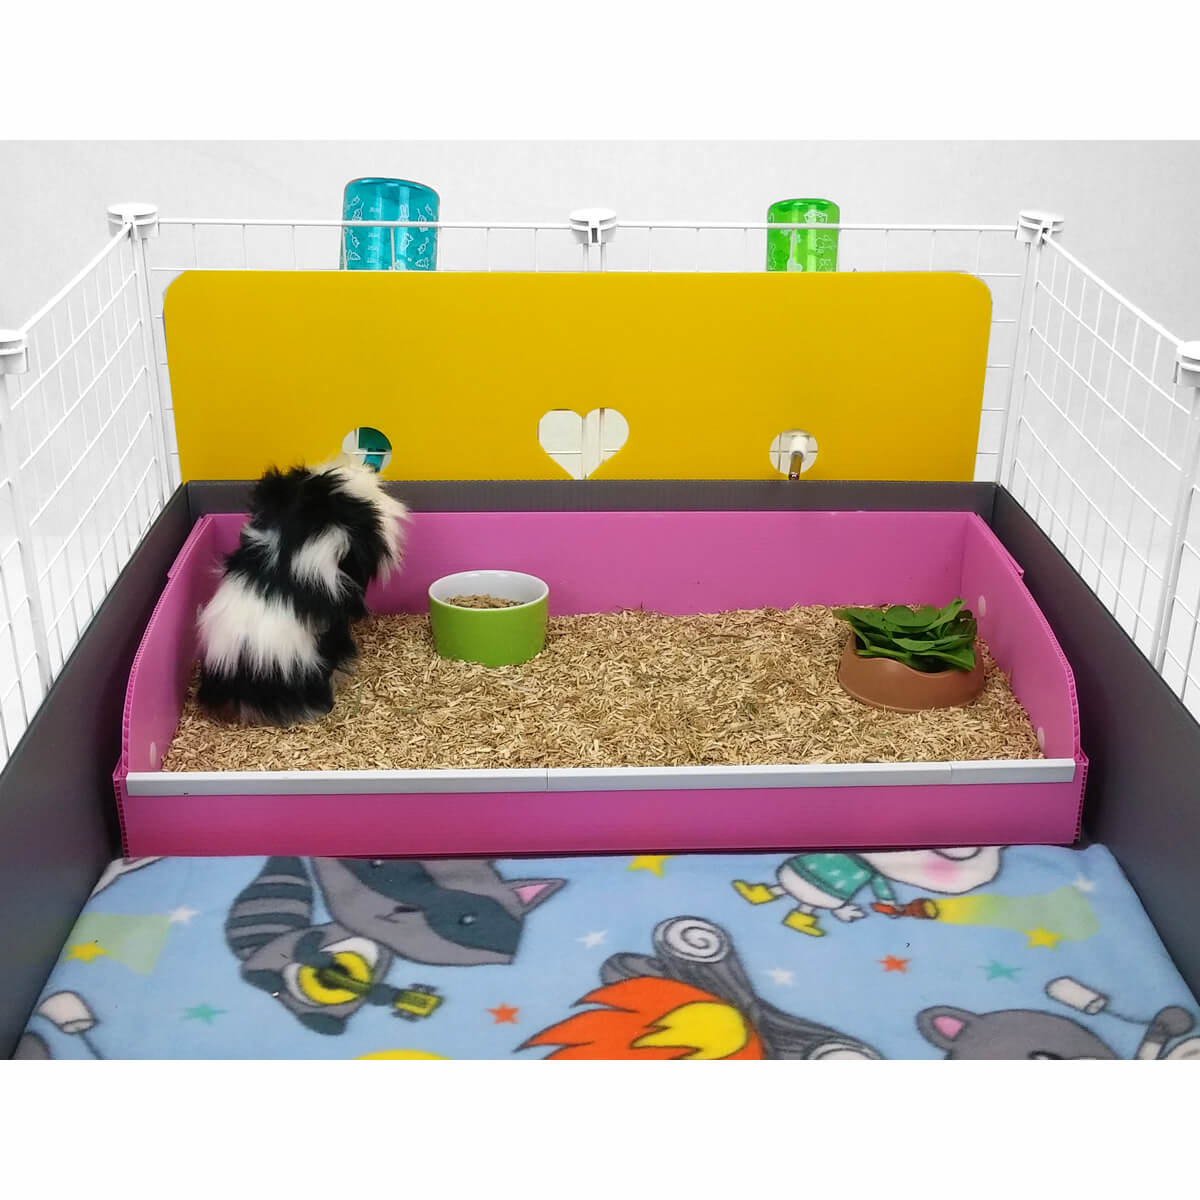 Yellow backsplash with heart cutout in a silver C&C guinea pig cage